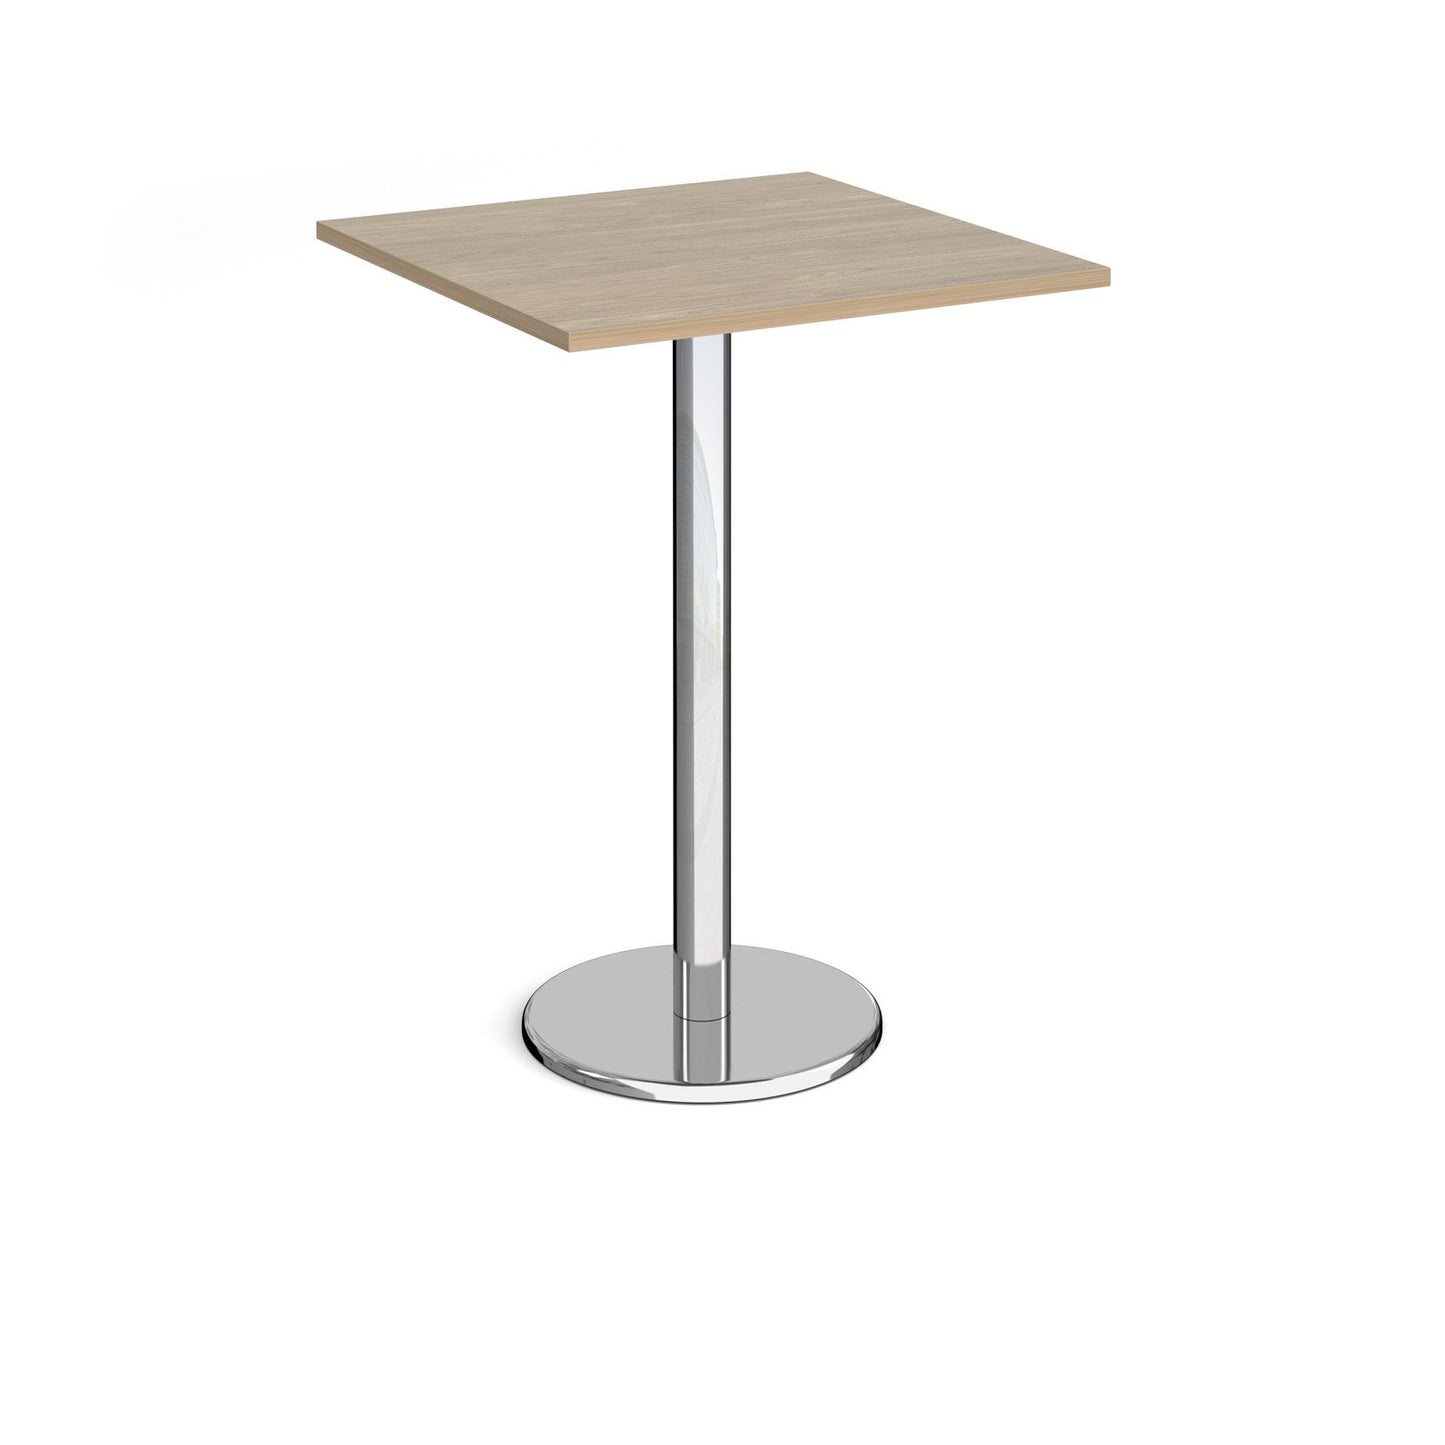 Pisa square poseur table with round base